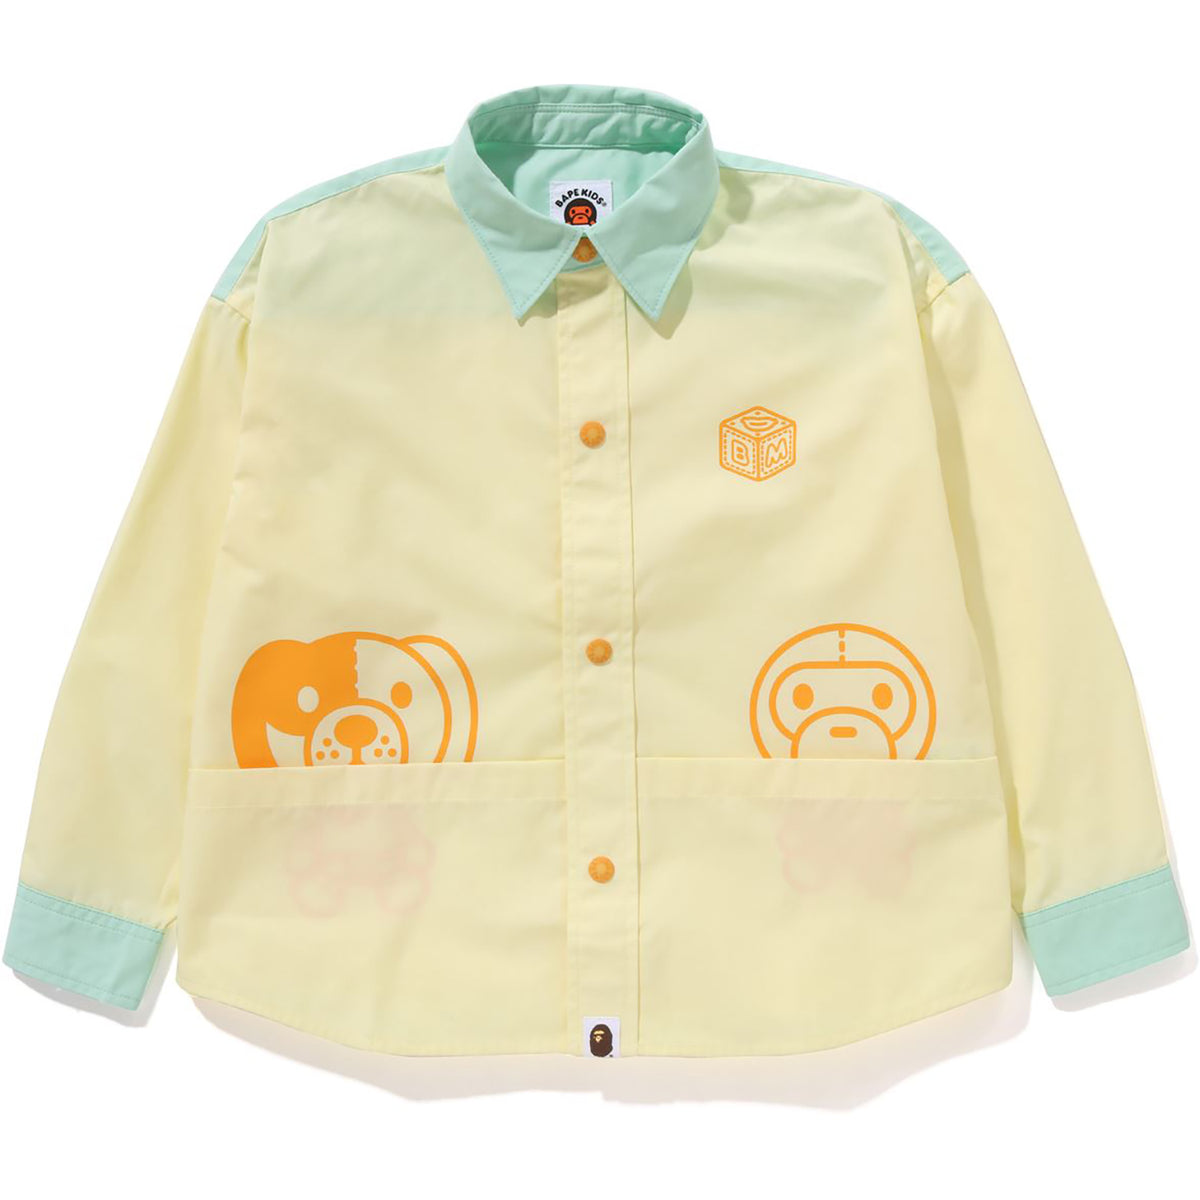 BABY MILO TOY SHIRT RELAXED FIT KIDS